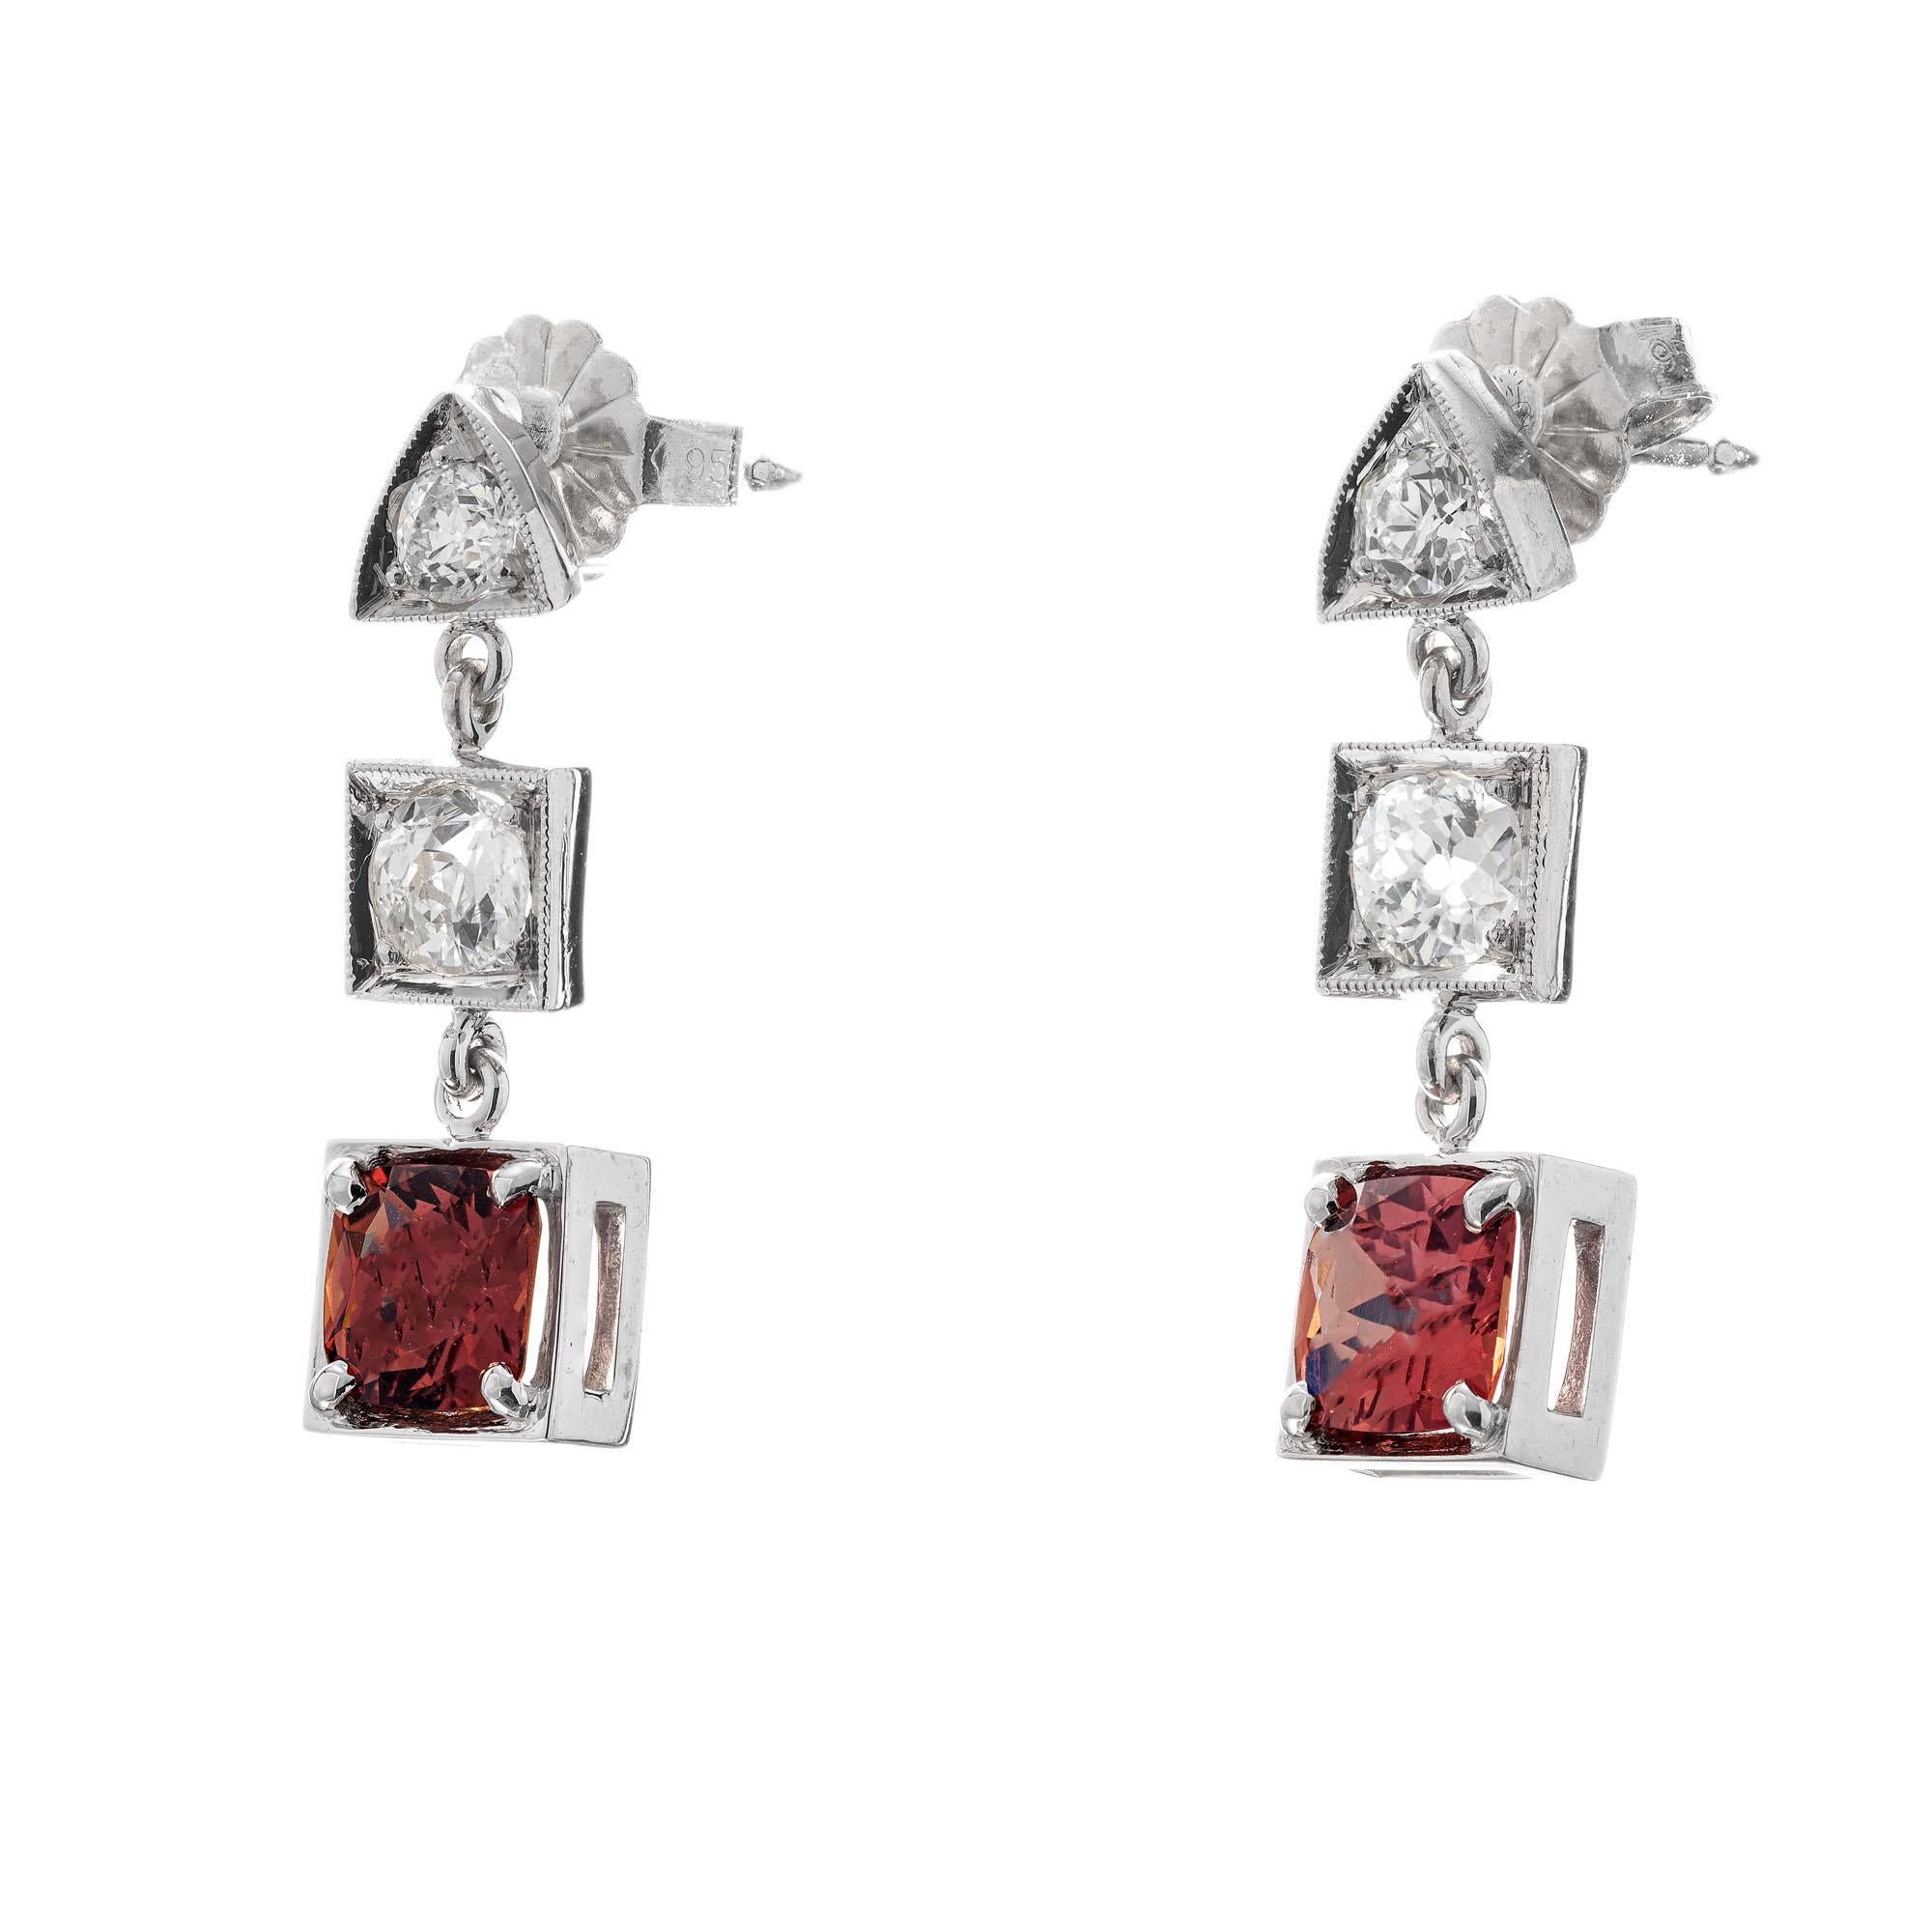 Art Deco Sapphire and diamond dangle earrings. GIA Certified natural no heat orange sapphire dangles with 4 old European accent diamonds in platinum square and triangle settings. Circa 1920's.

1 cushion brownish orange sapphire, VS SI approx.